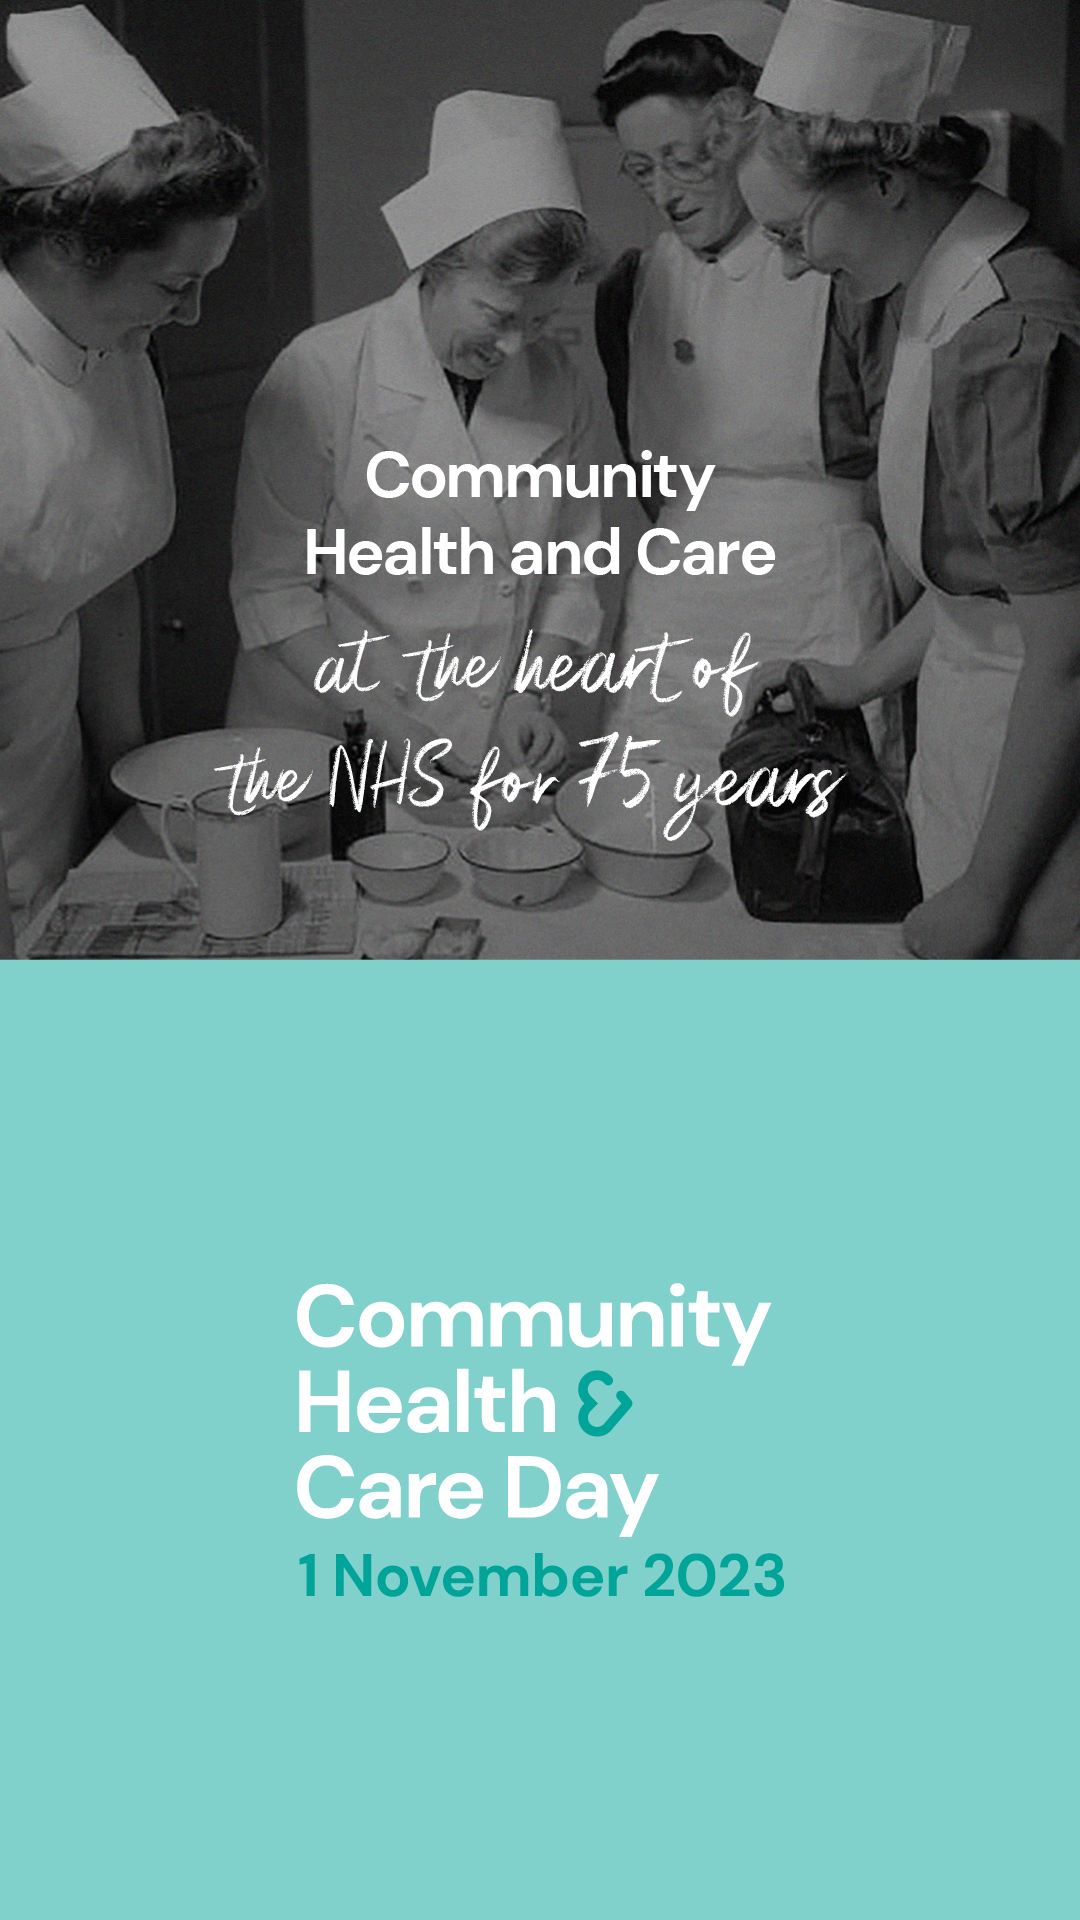 Community health and care day